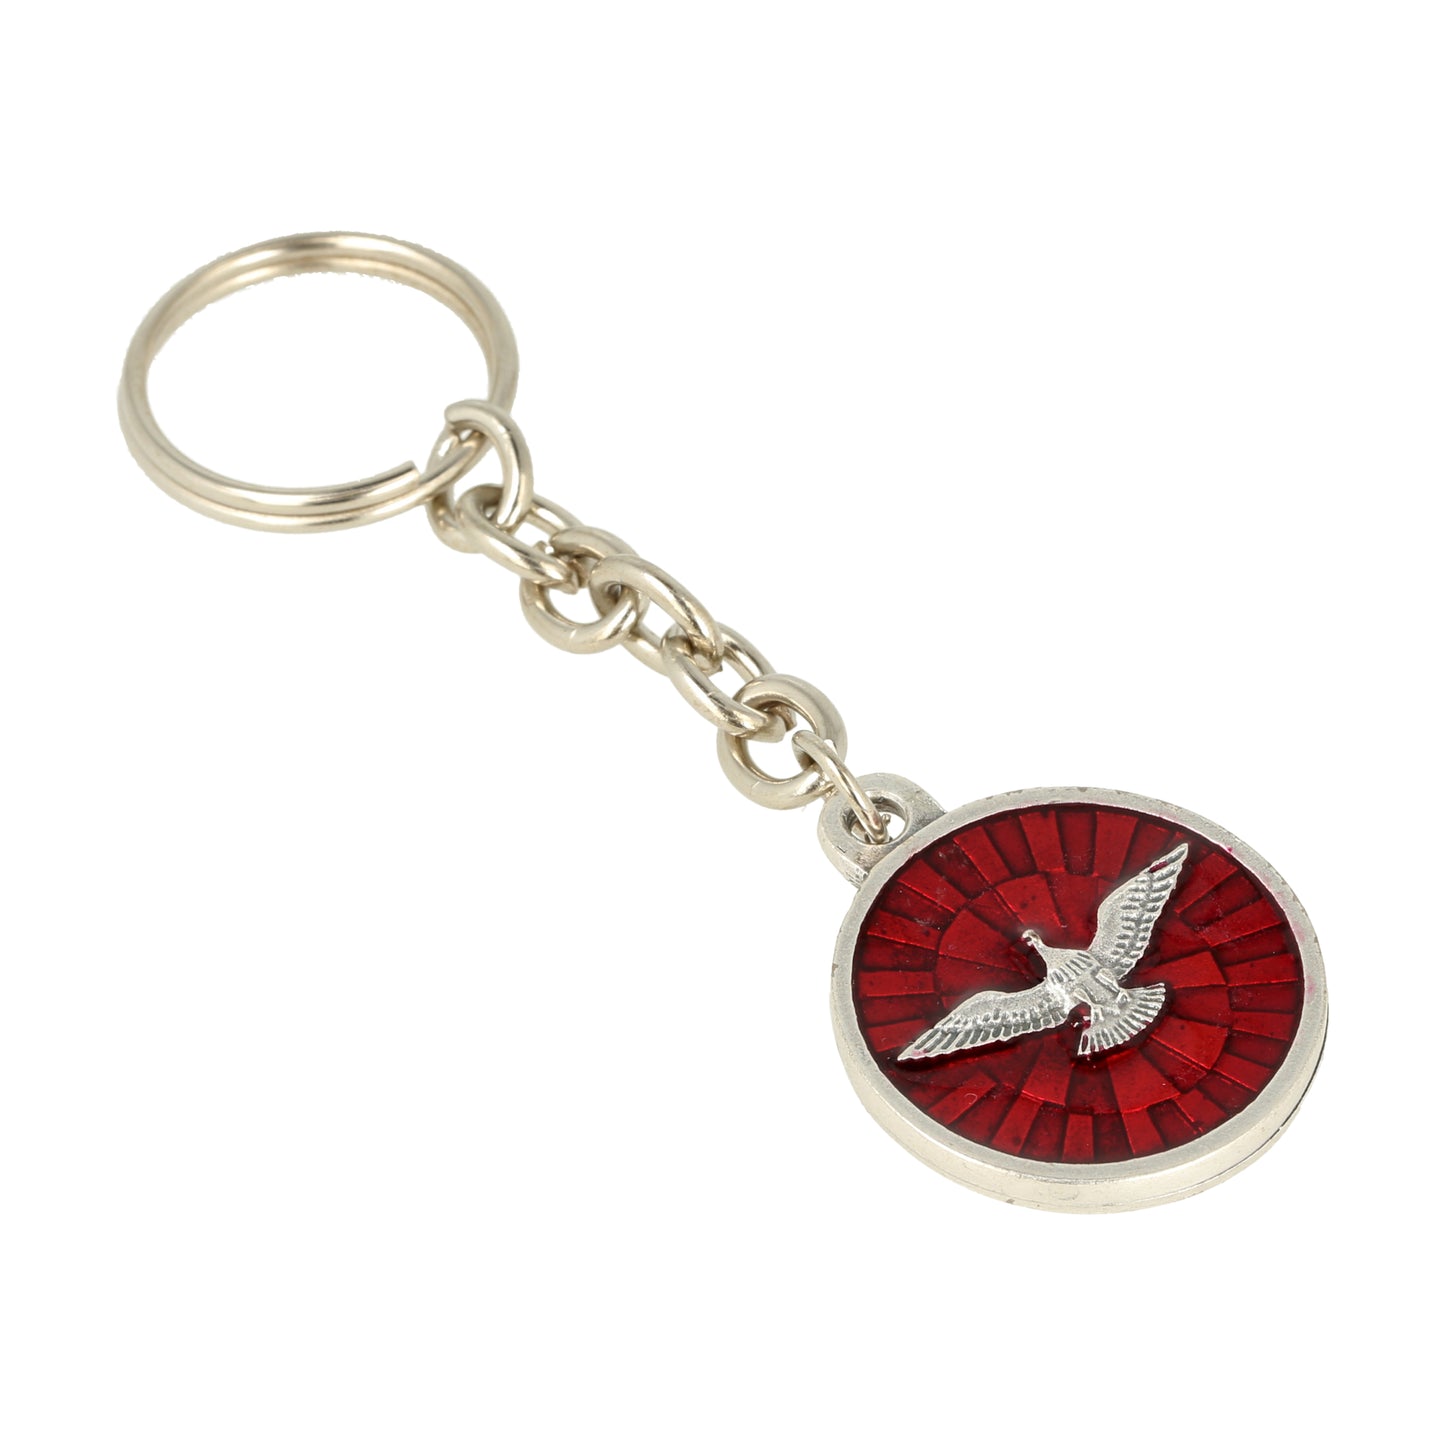 Keychain Holy Spirit 7 Gifts Silver Plated Red Resin. Souvenirs from Italy